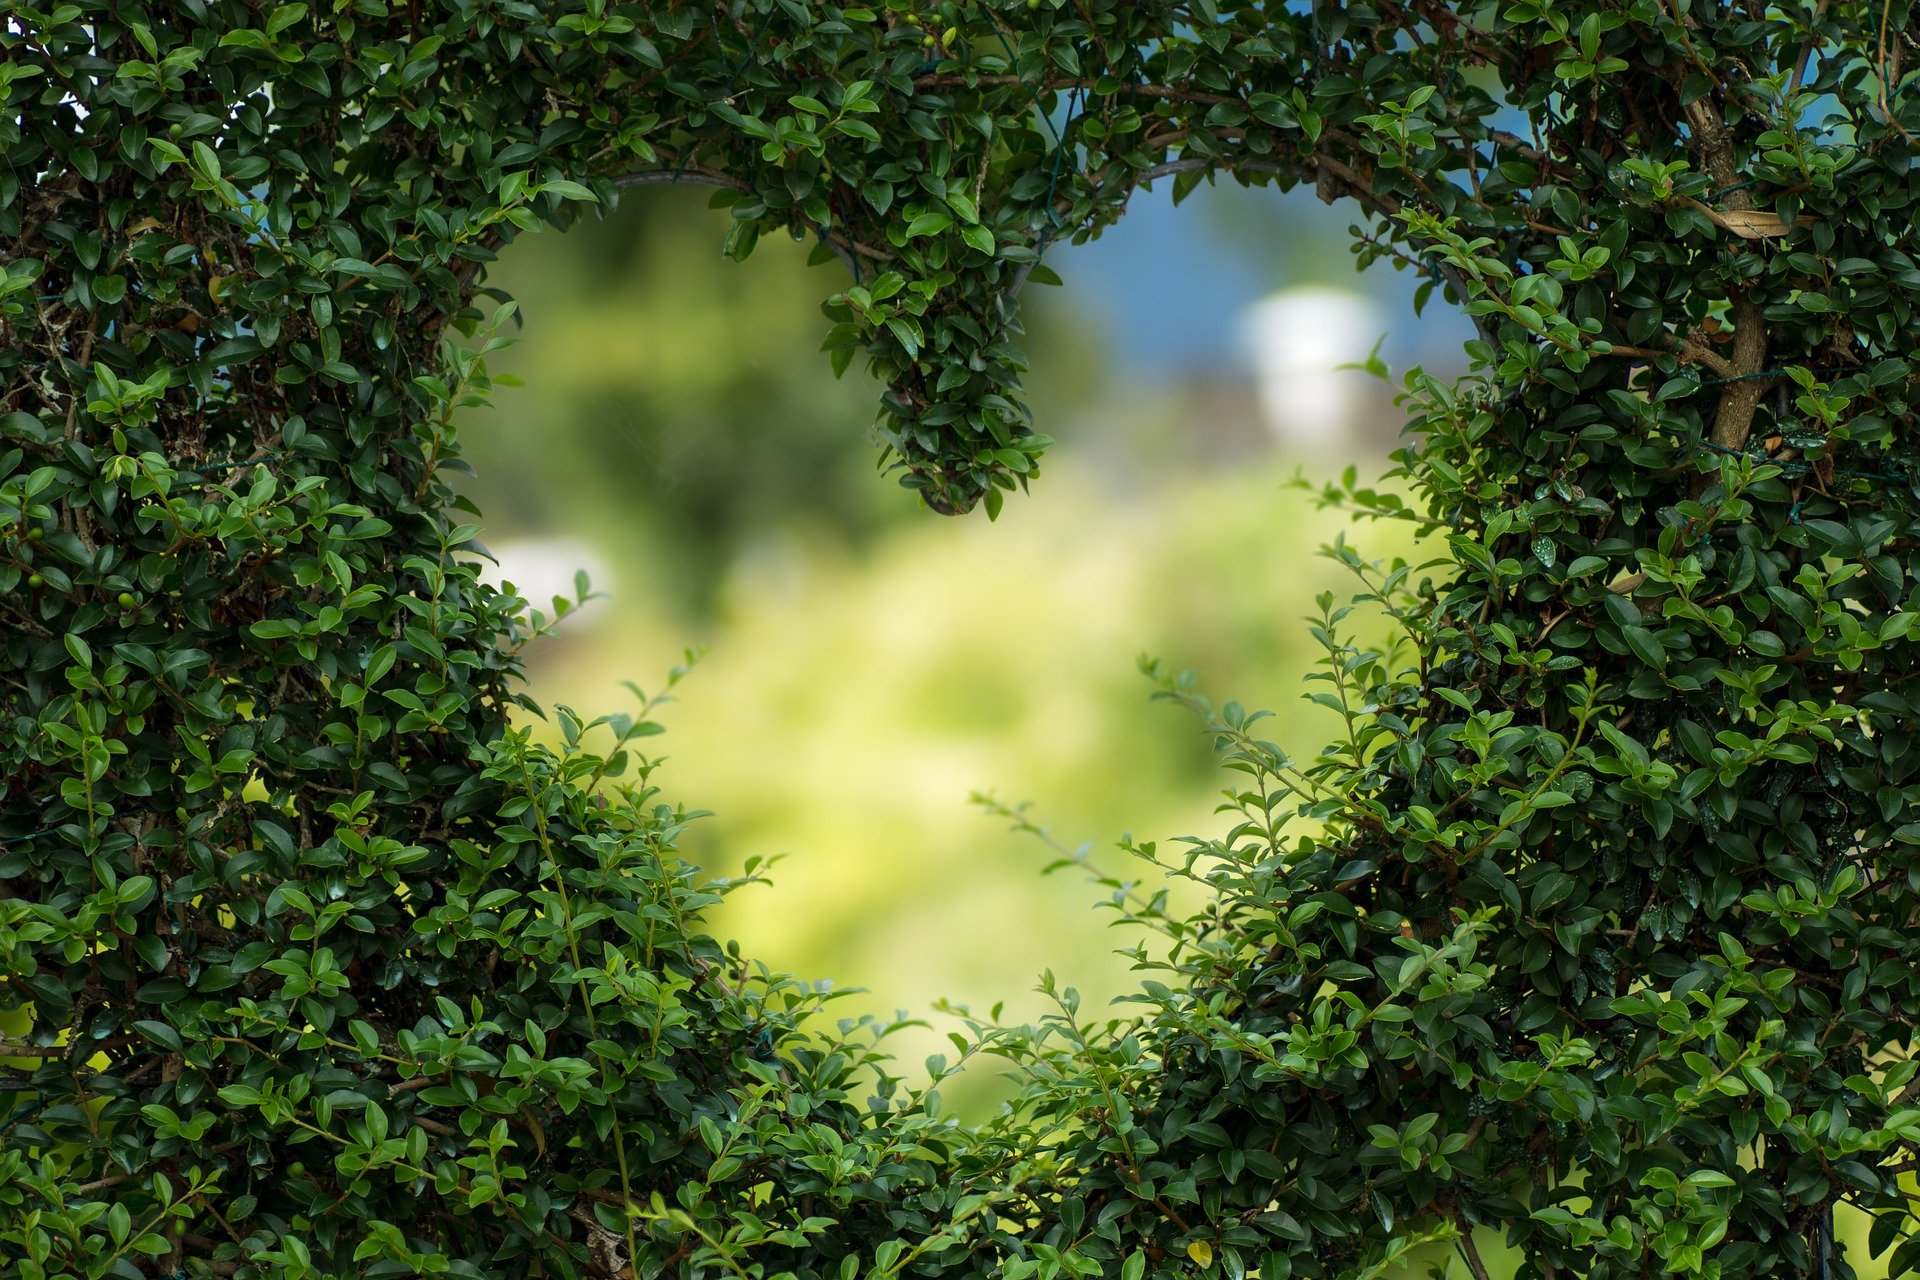 heart shape cut out of a green hedge